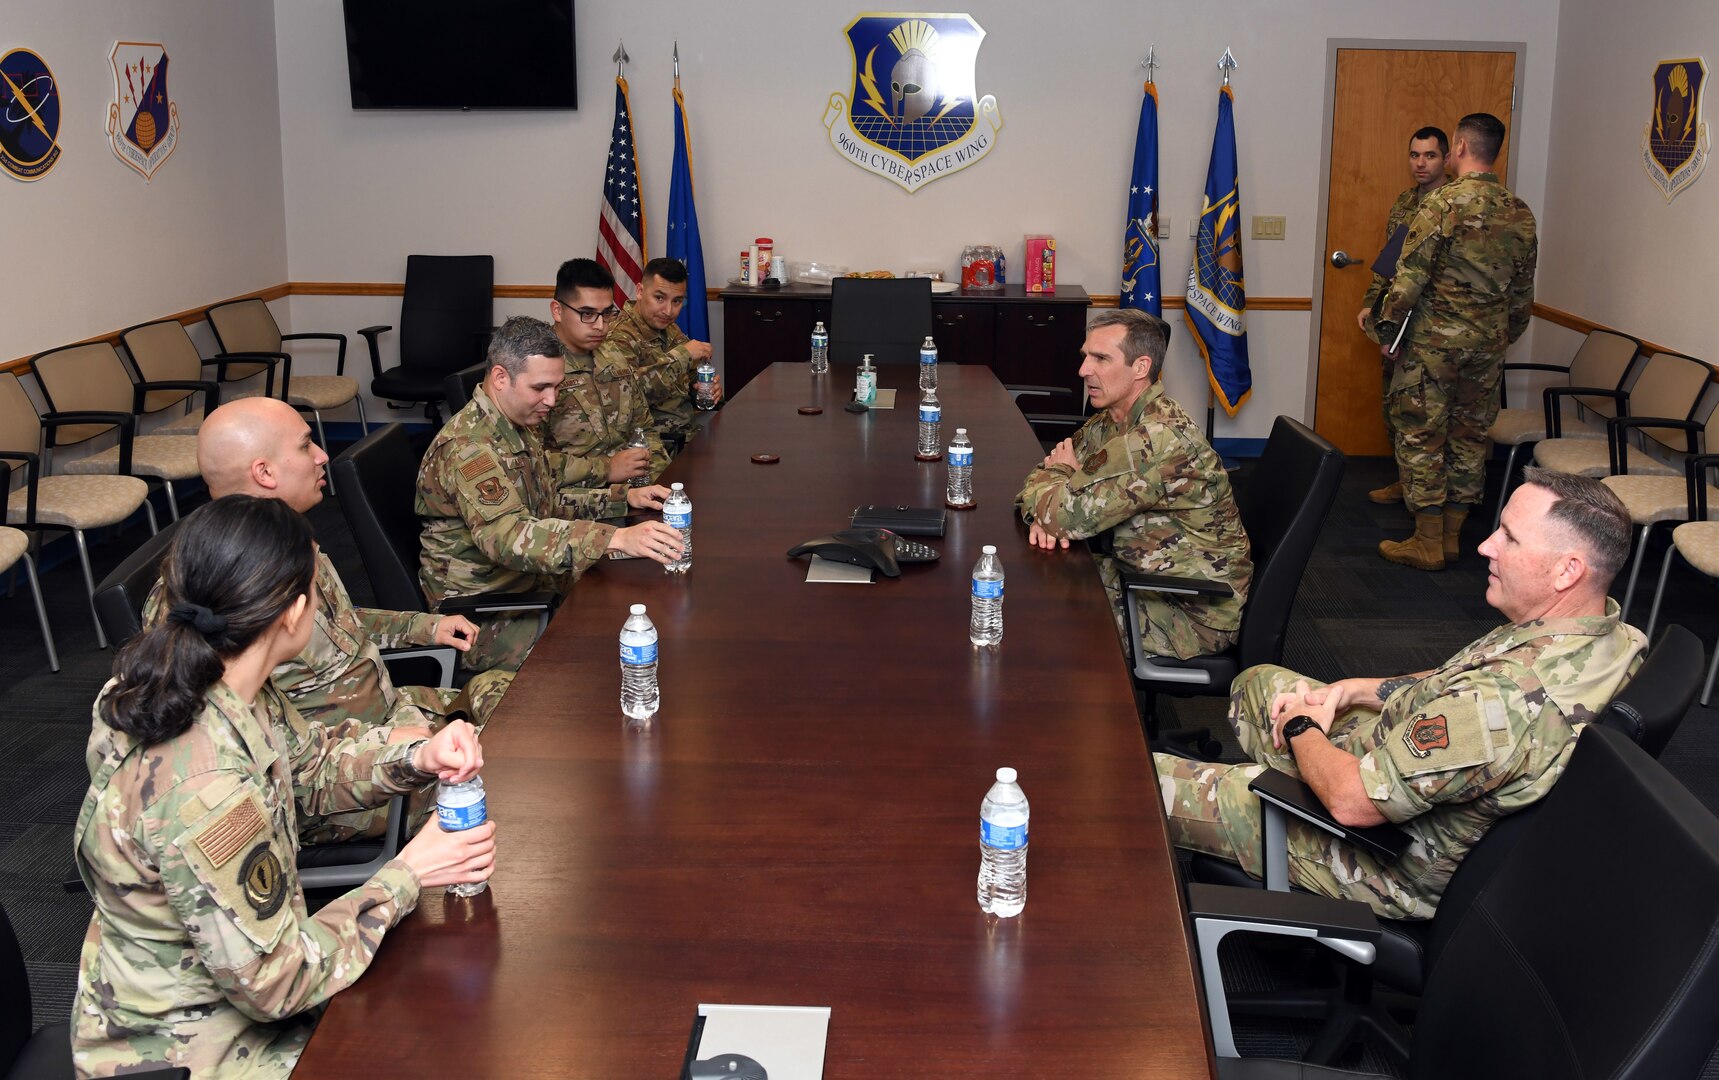 Maj. Gen. Bryan P. Radliff, 10th Air Force commander (center-right), and Chief Master Sgt. Jeremy N. Malcolm, 10th AF command chief (right), meet with 960th Cyberspace Wing Airmen to discuss successes and concerns April 2, 2022, at Joint Base San Antonio-Chapman Training Annex, Texas. These meetings provide an opportunity for senior leaders to interact directly with junior unit Airmen. (U.S. Air Force photo by Kristian Carter)